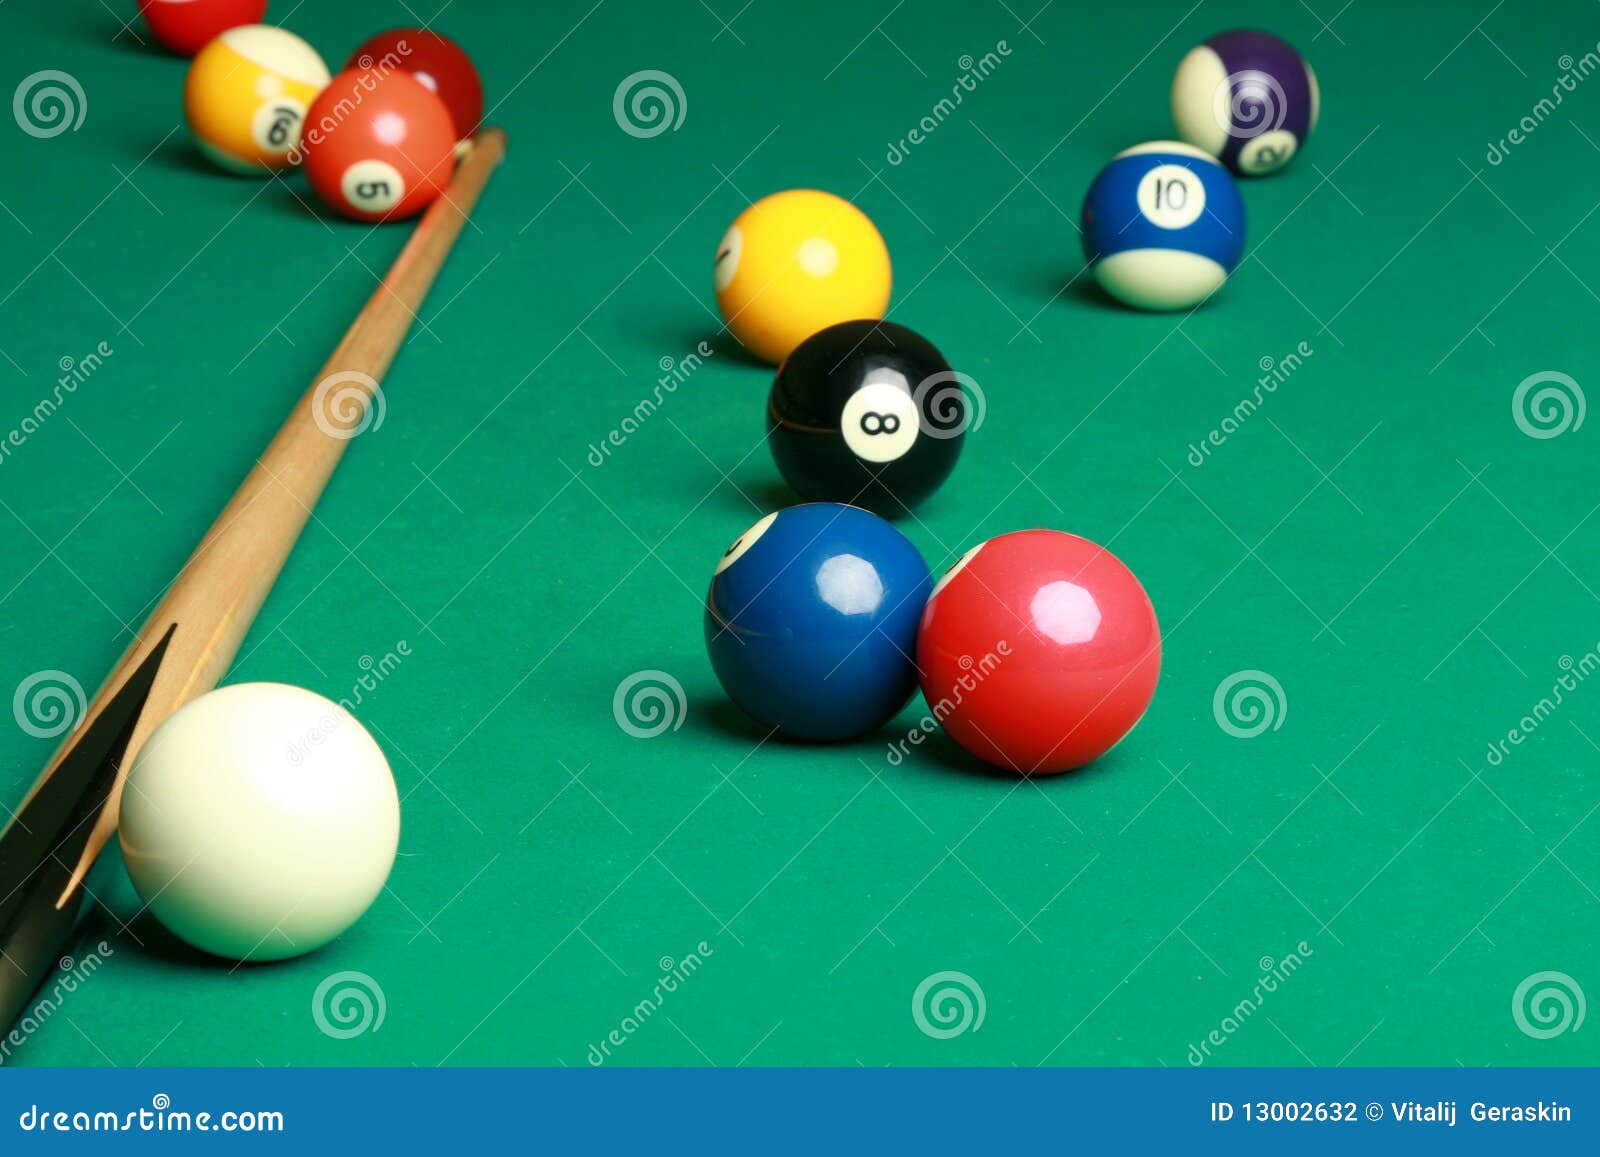 Billiard Table With A Couple Of Balls Stock Photography  Image 